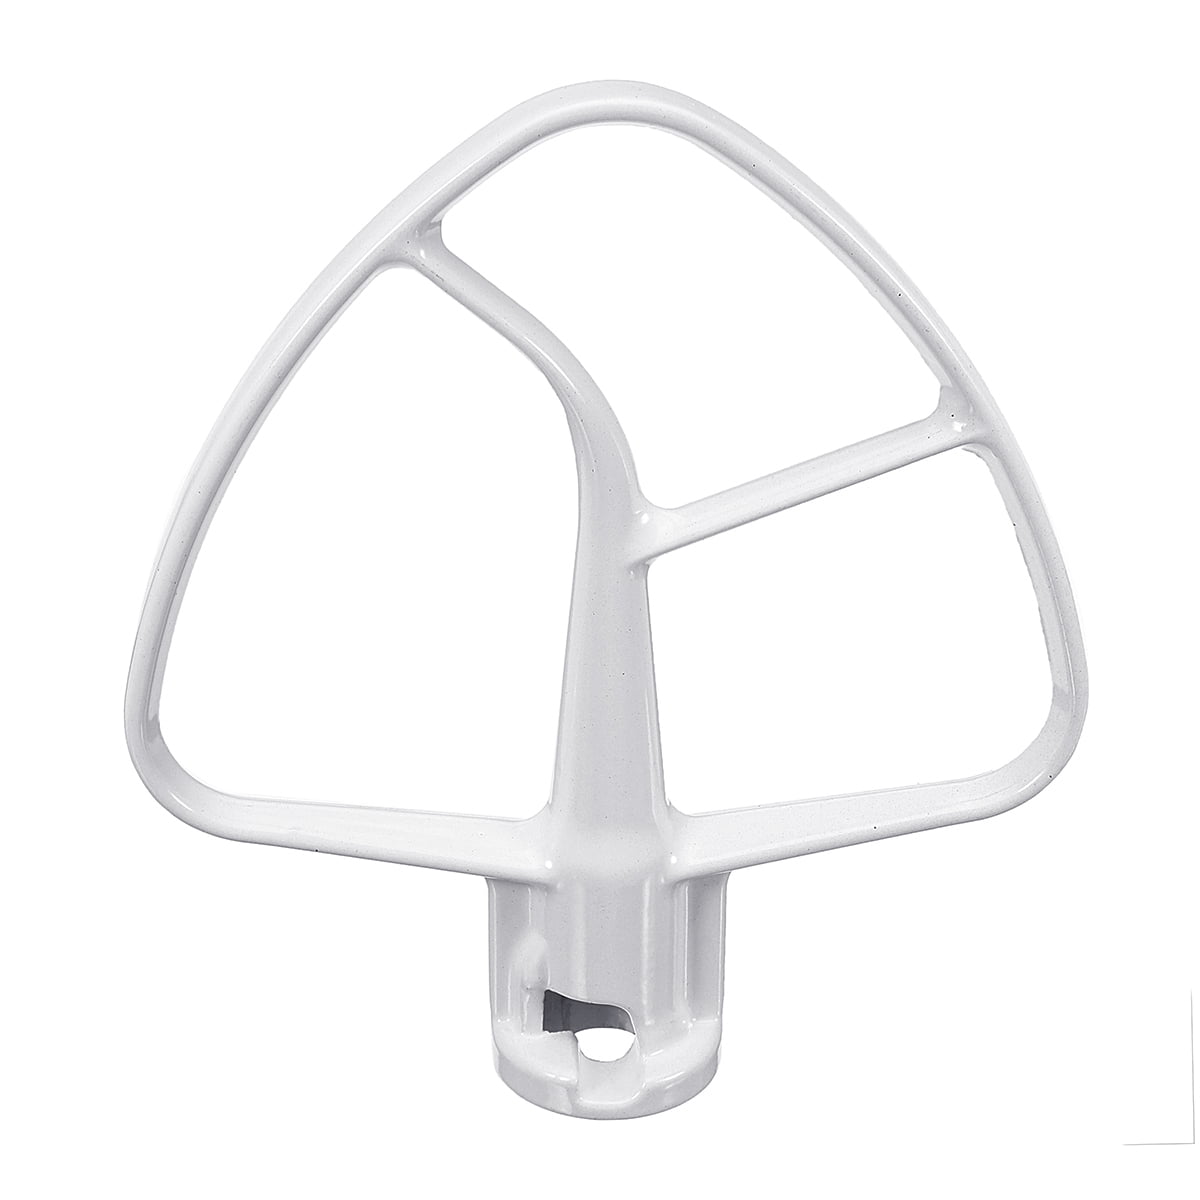 K45B 4.5 QT Flat Coated Beater For Stand Mixer Whirlpool ...
